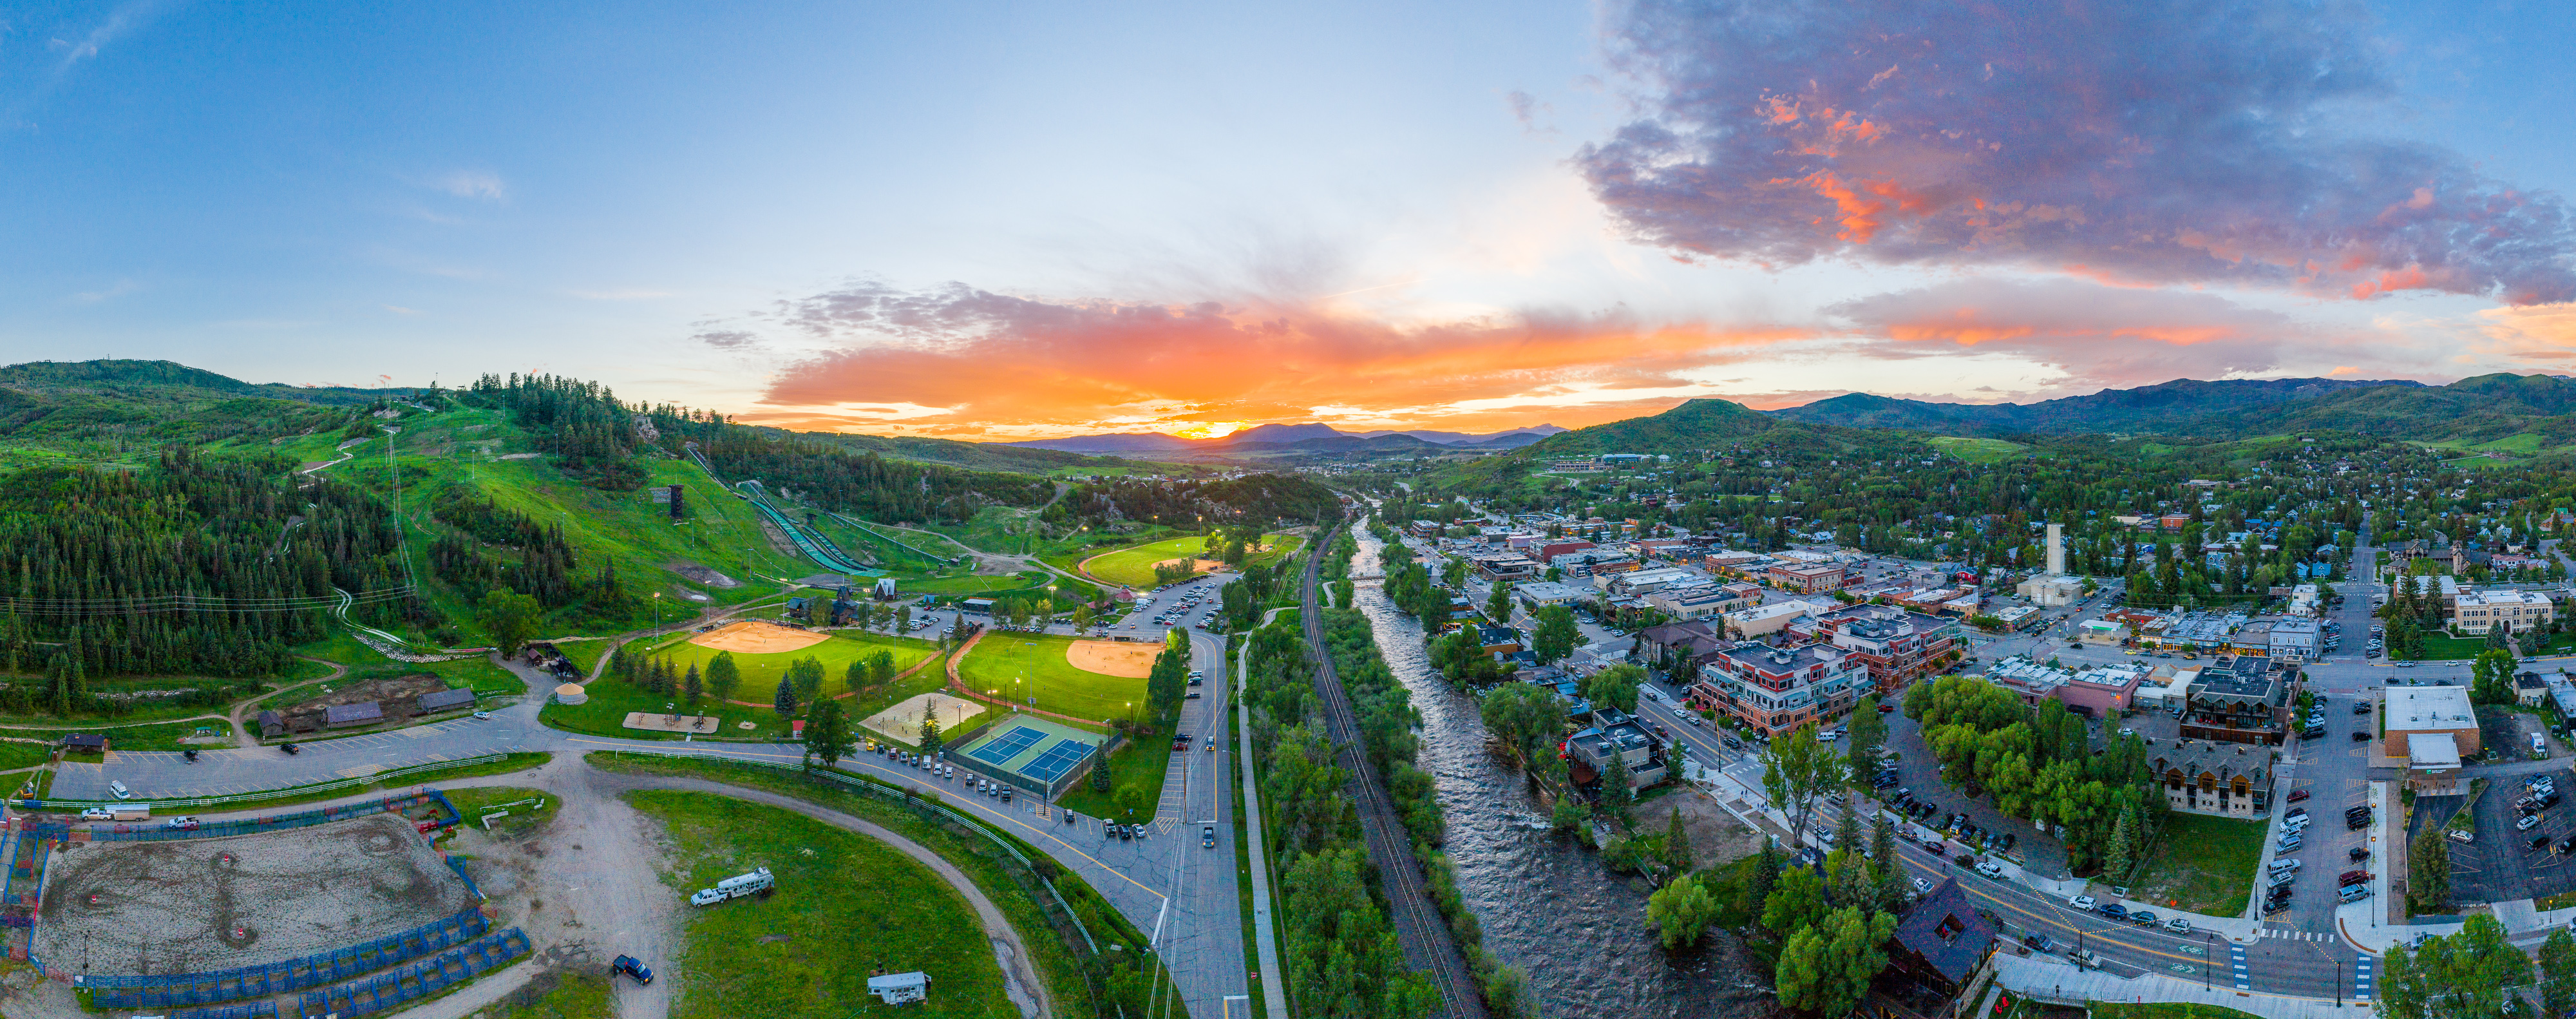 Summer Events in Steamboat Springs